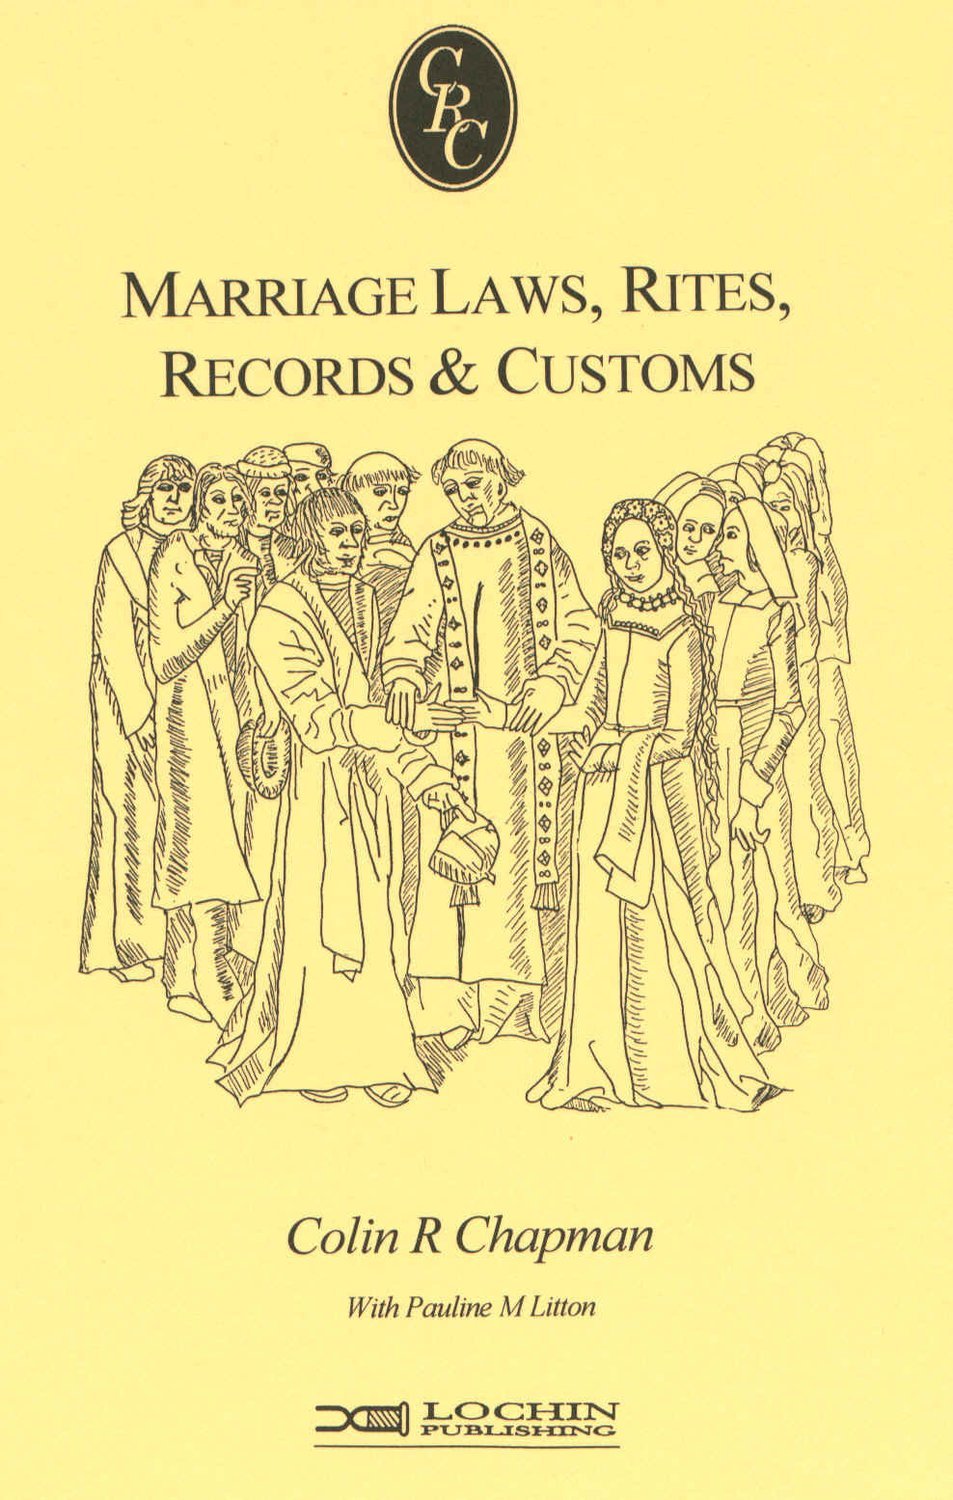 Marriage Laws, Rites, Records & Customs